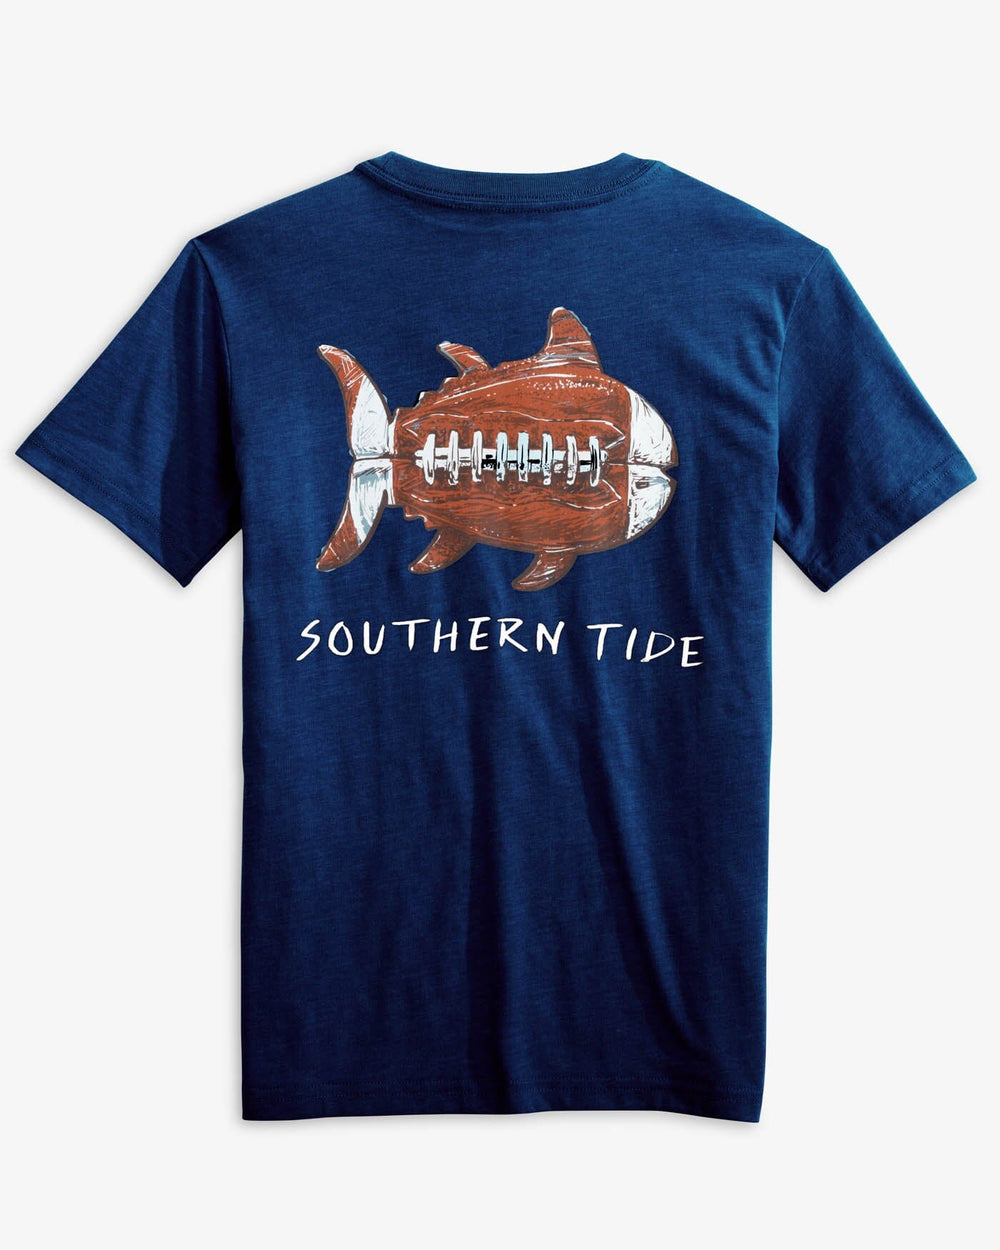 The back view of the Southern Tide Kids Sketched Football Heather T-Shirt by Southern Tide - True Navy